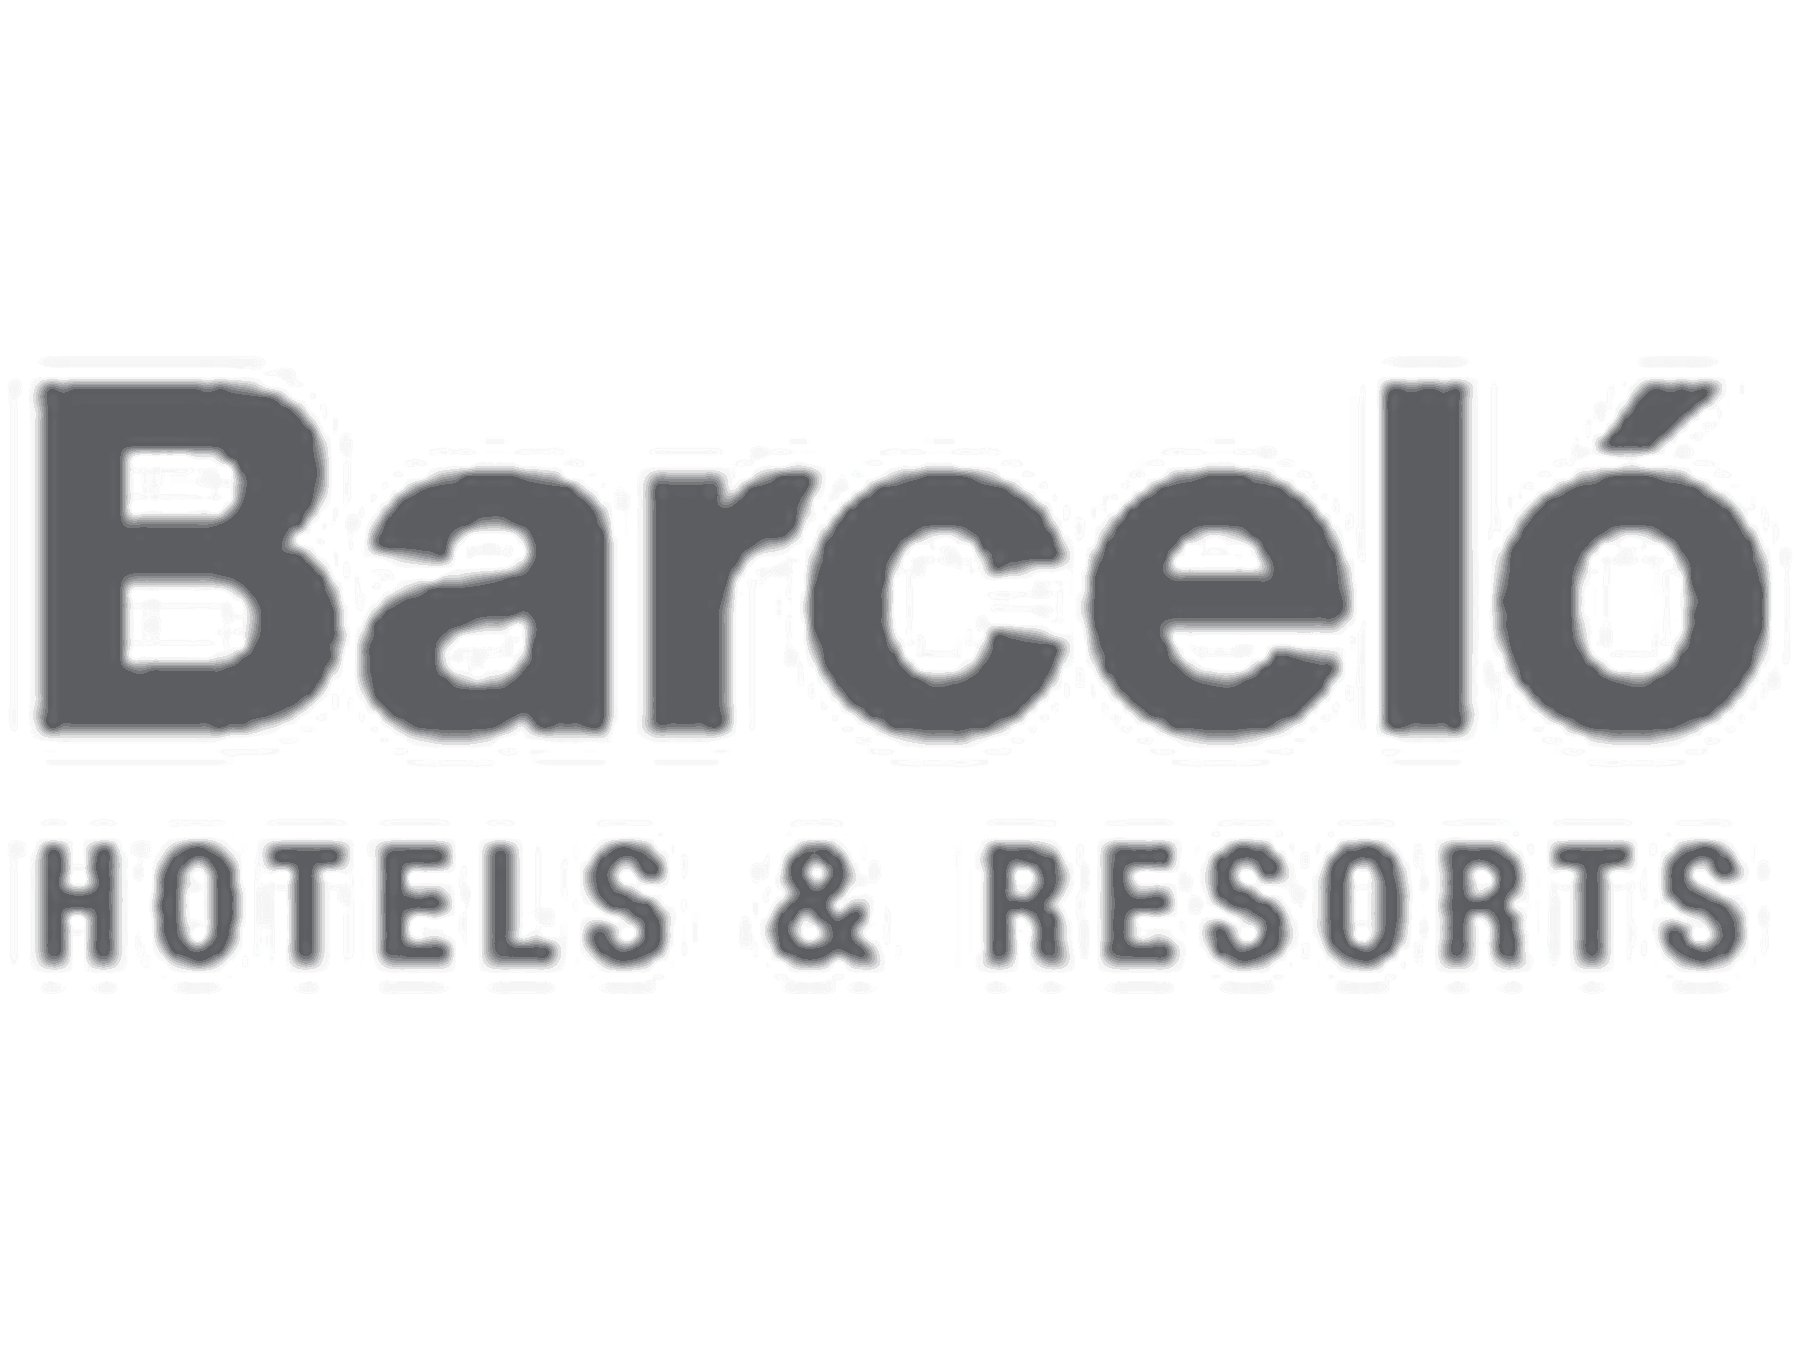 Barceló Hoteles y Resorts